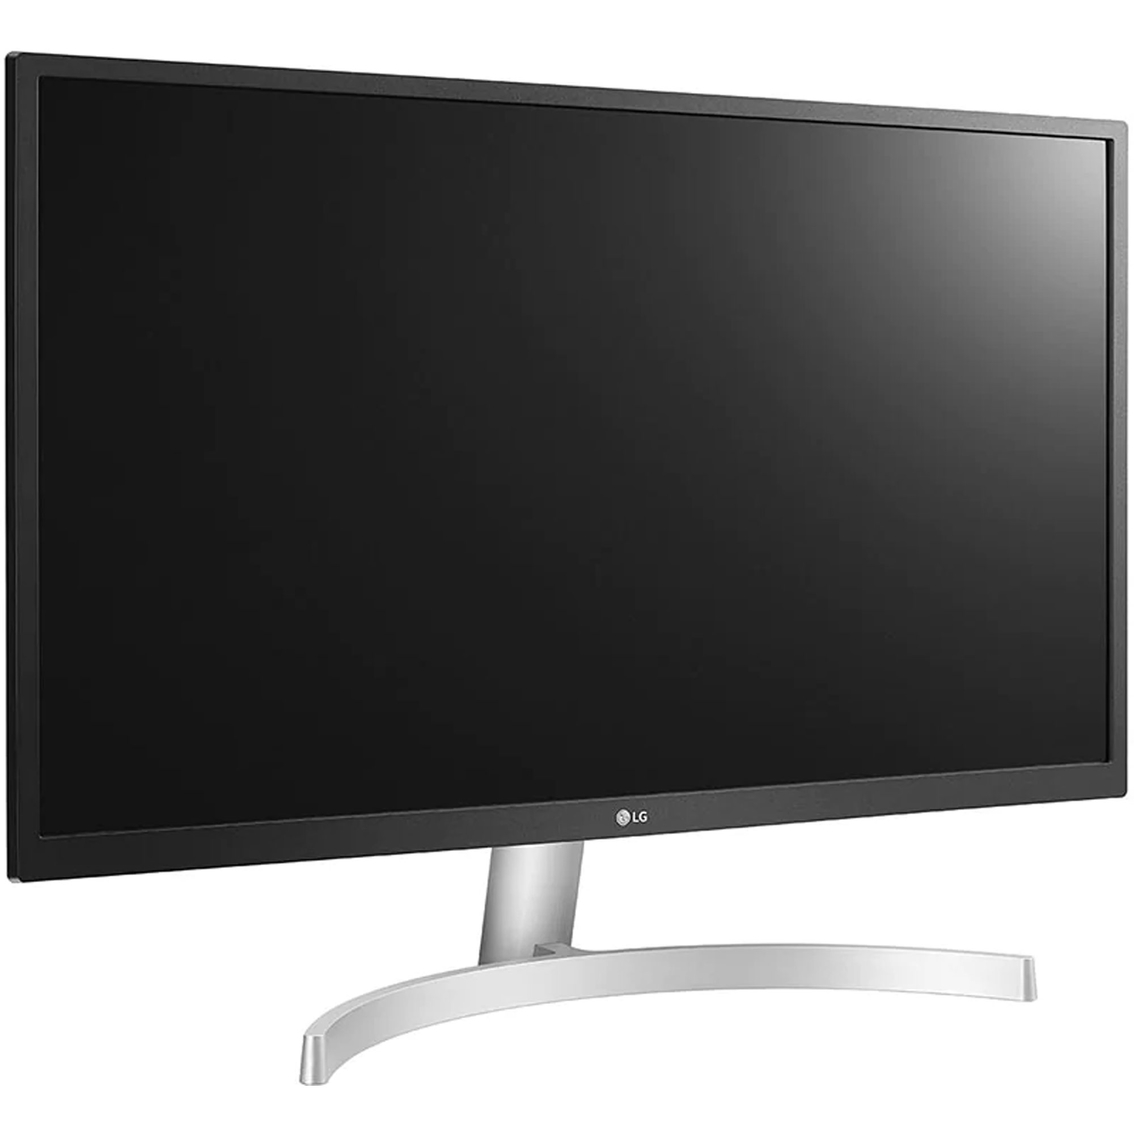 LG 27 in. 4K UHD IPS LED Monitor with HDR - Image 3 of 7